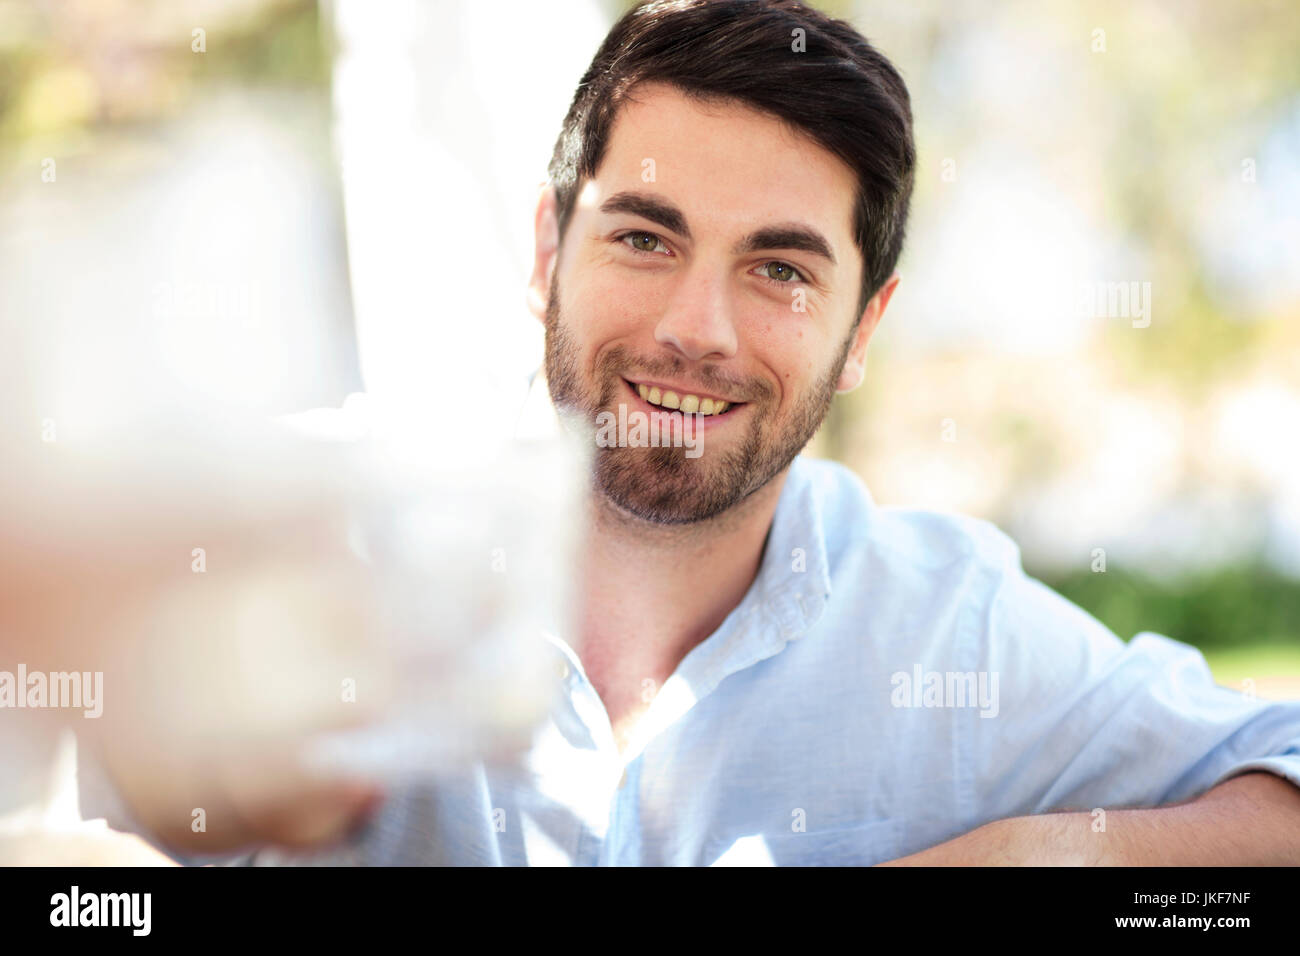 Portrait of smiling young man outdoors Stock Photo